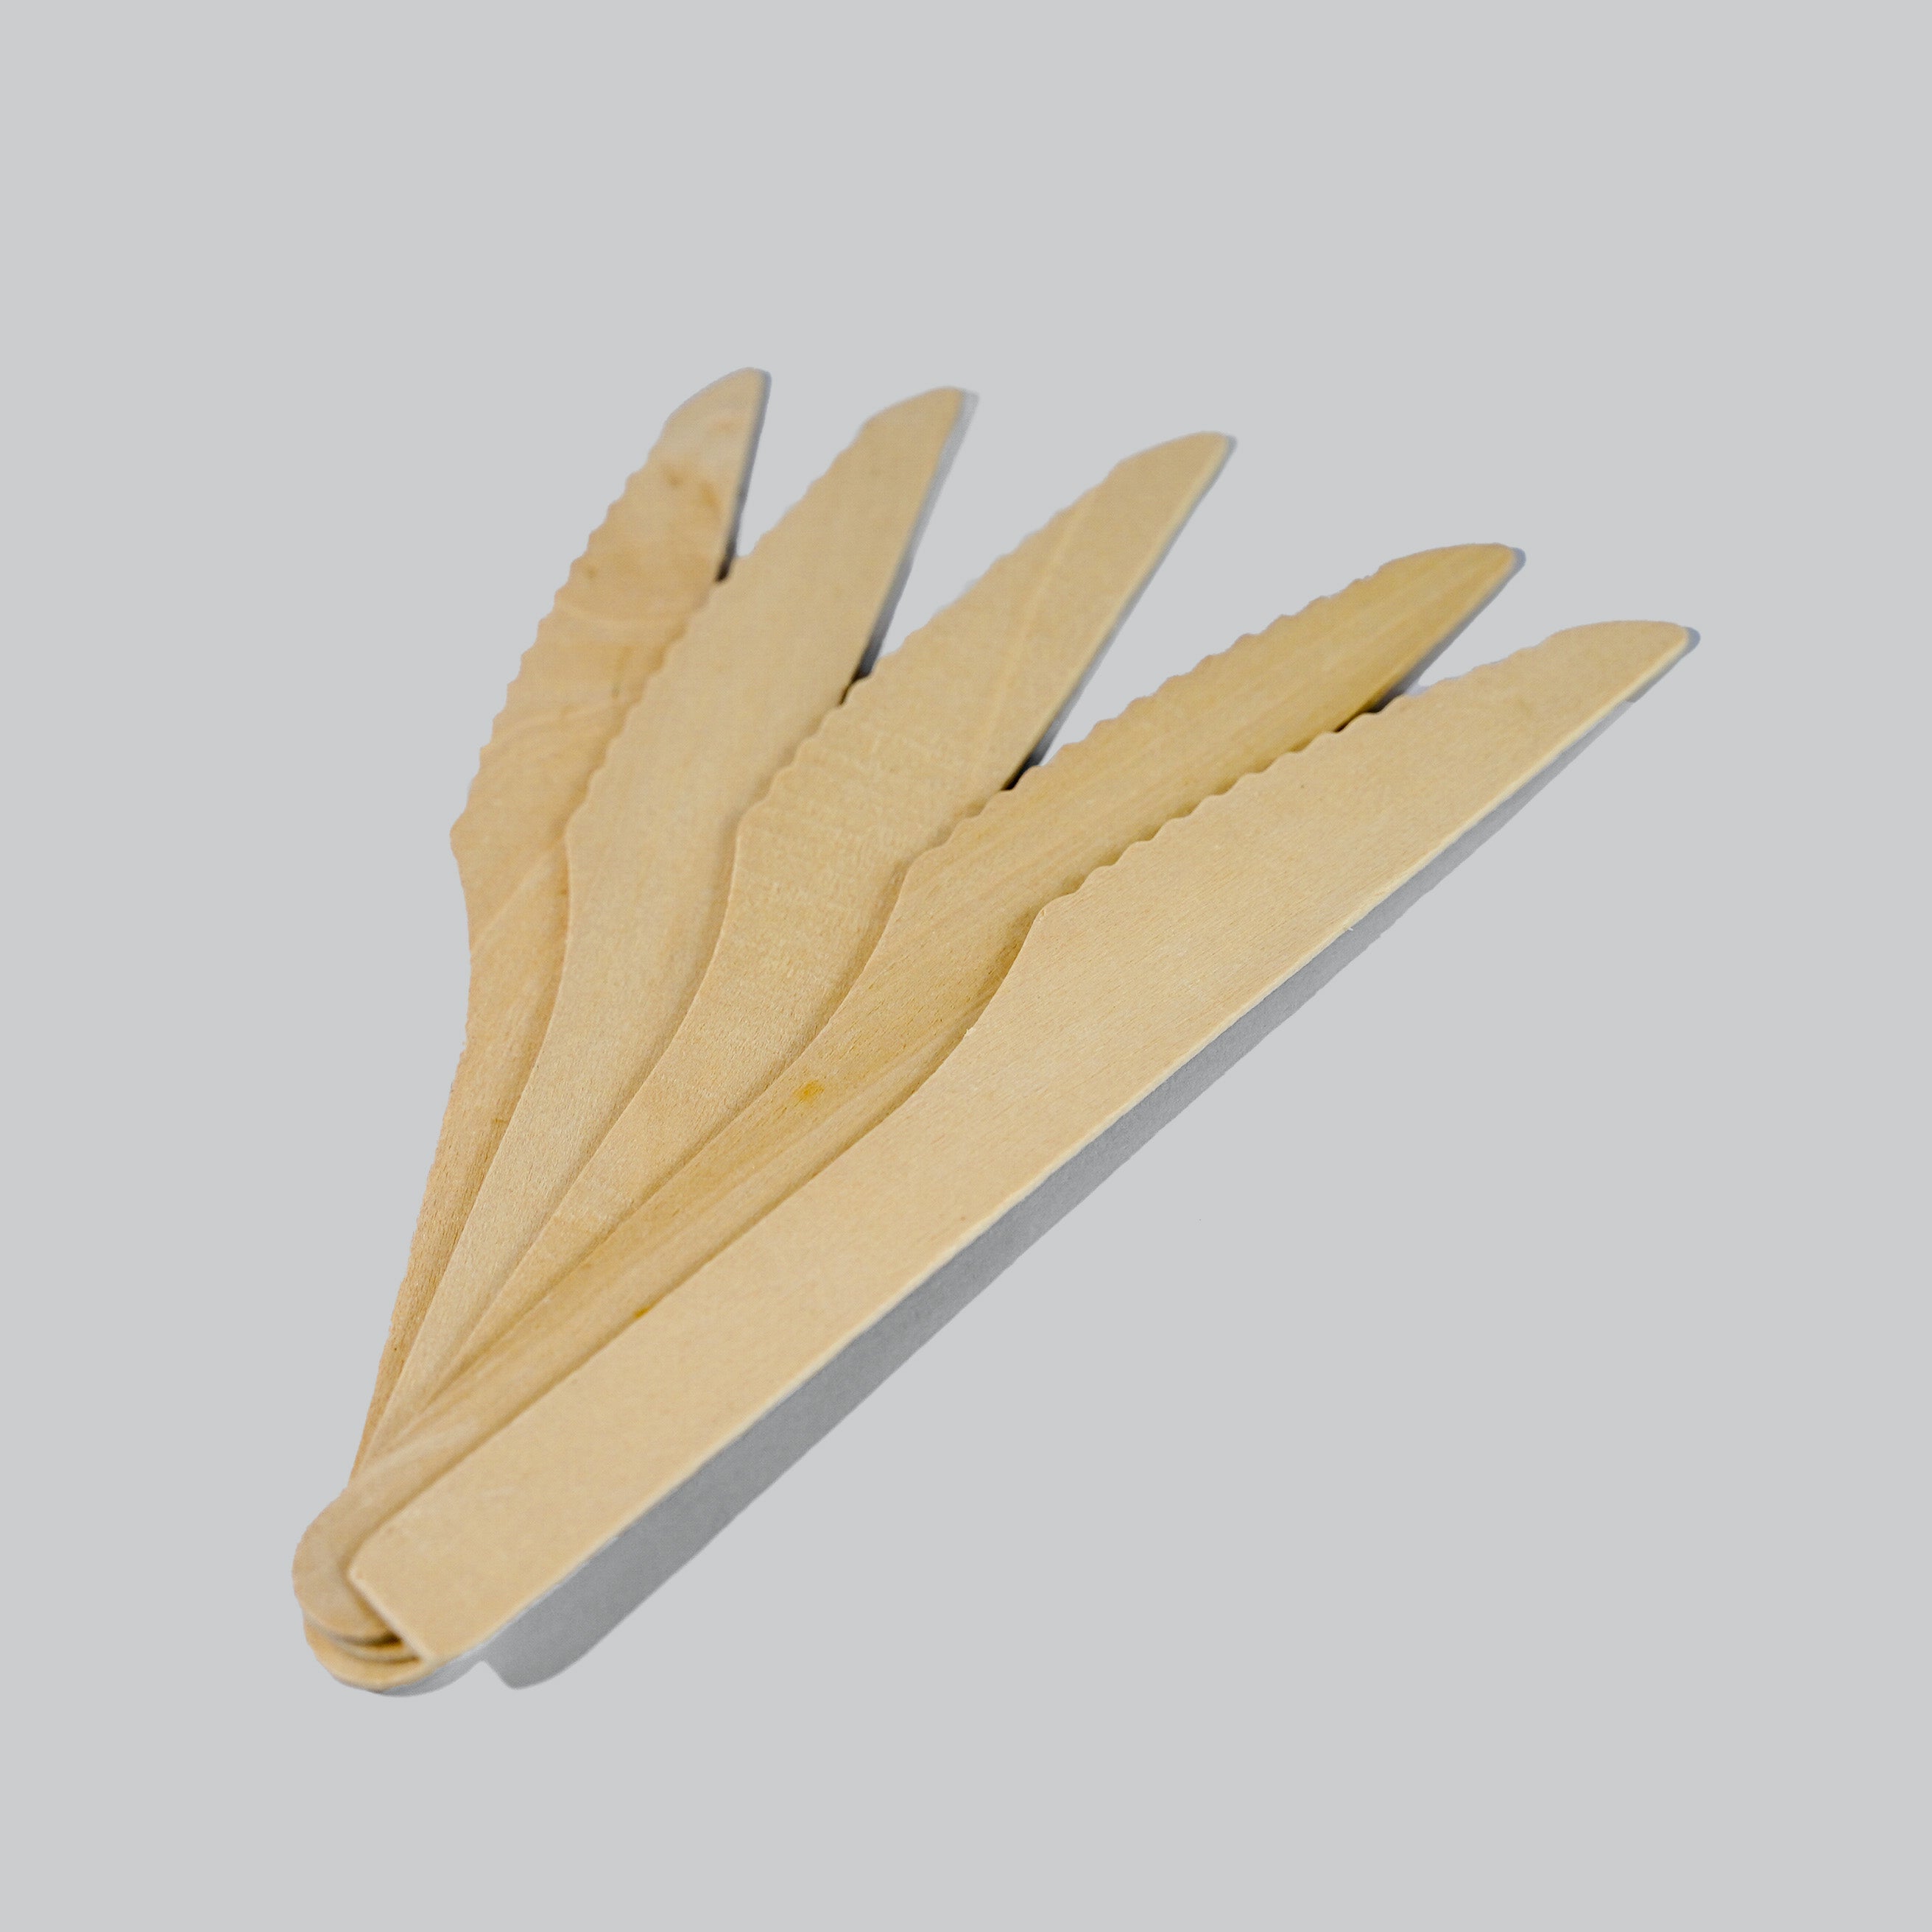 Wooden Knives - Pack of 15 by EQUO